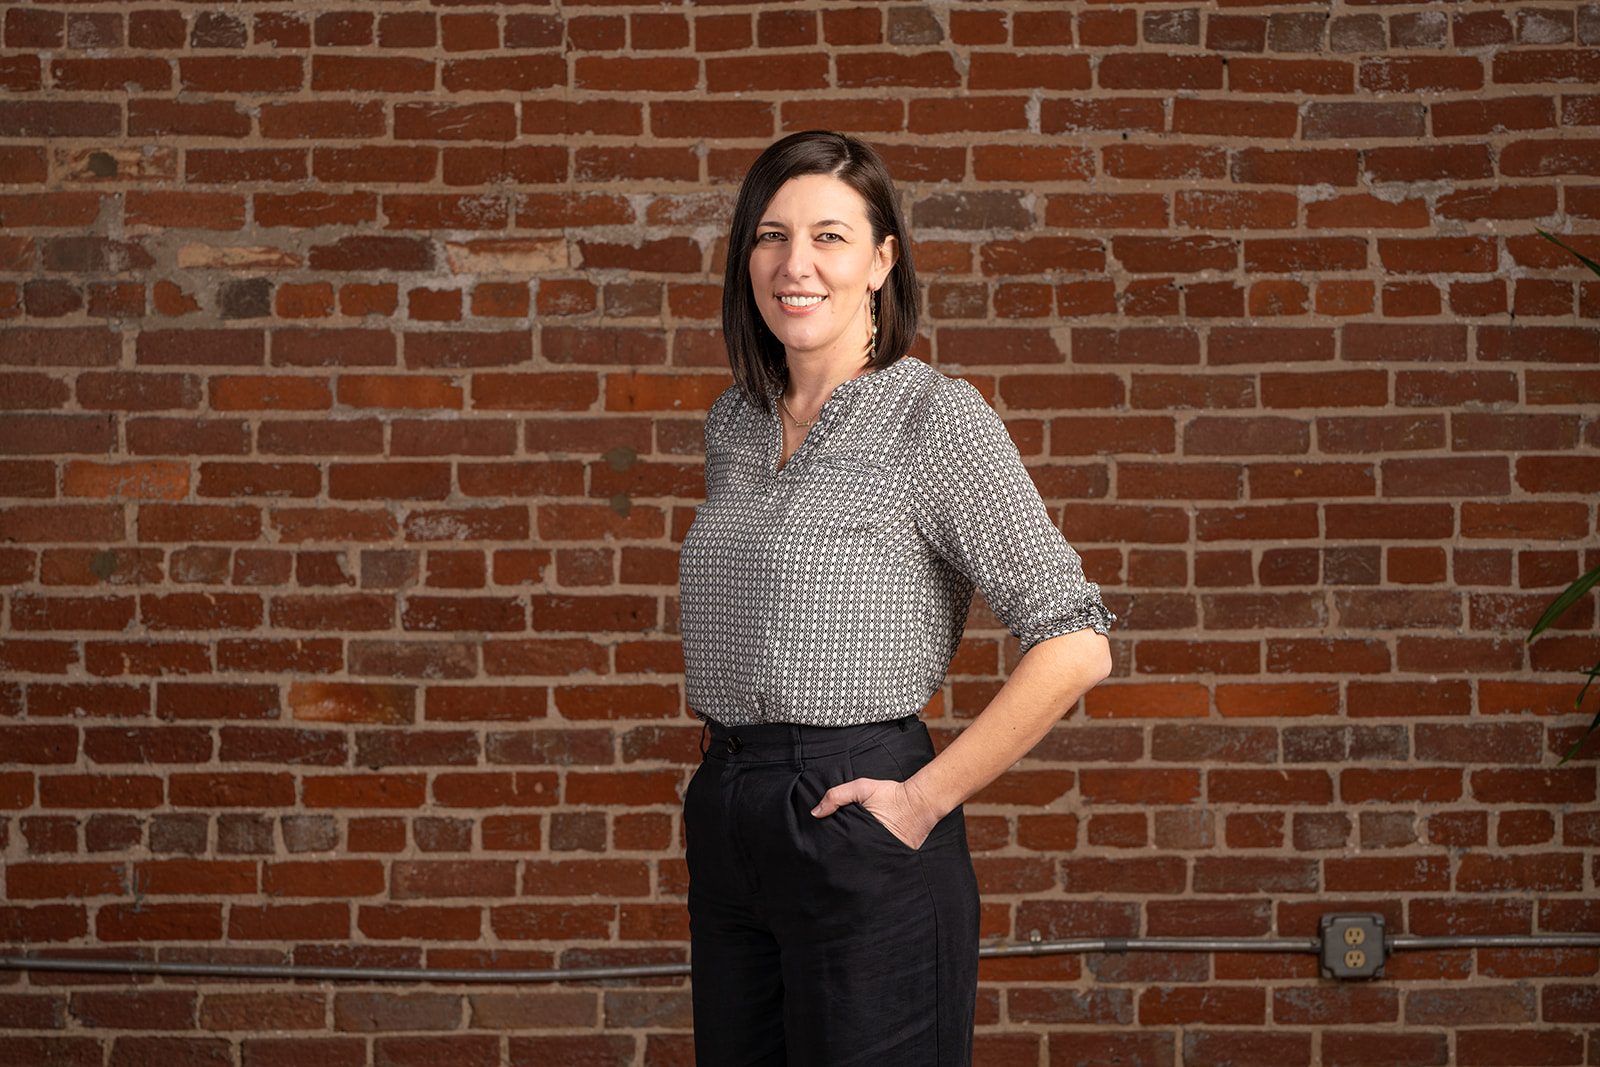 Team member Marija, standing in front of a red brick wall.